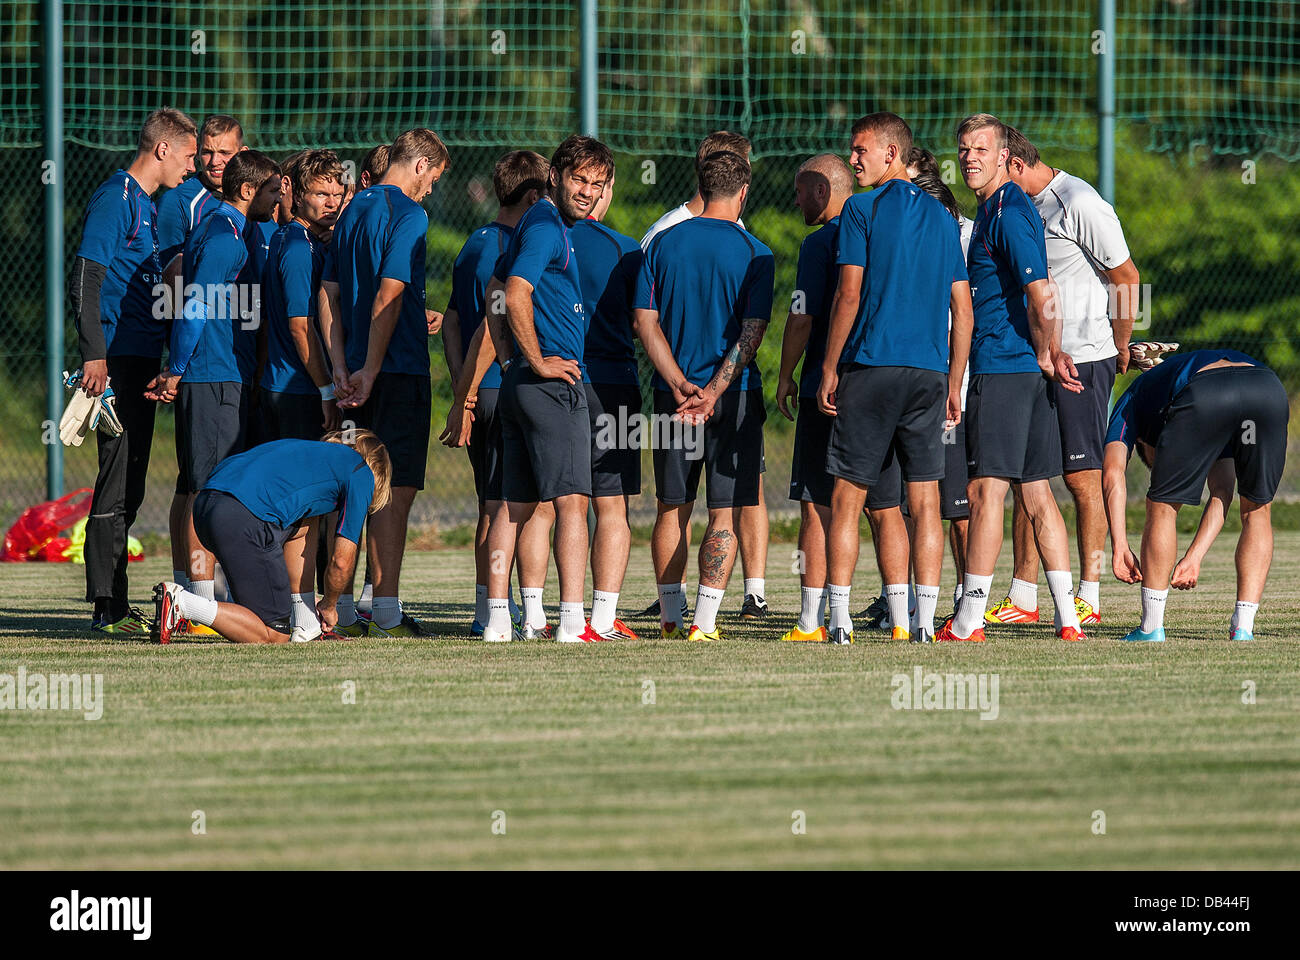 Players of Skonto Riga is seen during a training prior to the match of Europa League, 2nd preliminary round, Slovan Liberec vs Skonto Riga in Liberec, Czech Republic, July 23, 2013. (CTK Photo/Radek Petrasek) Stock Photo